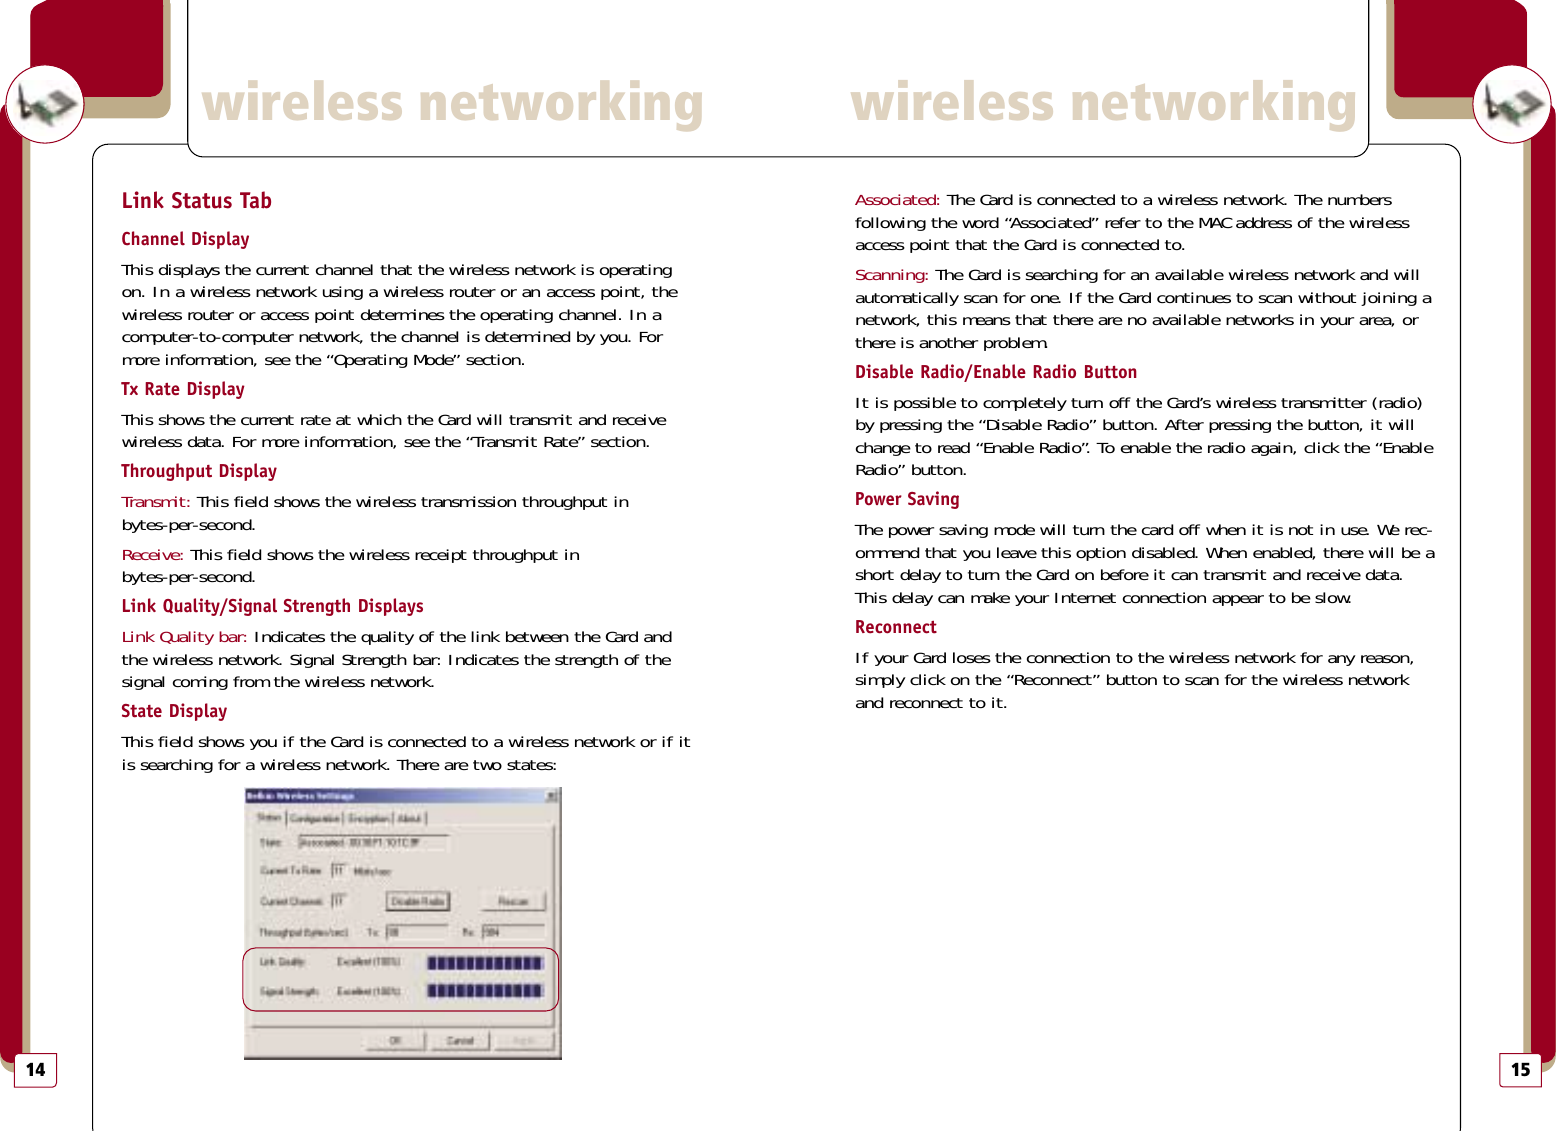 15Associated: The Card is connected to a wireless network. The numbers following the word “Associated” refer to the MAC address of the wirelessaccess point that the Card is connected to.Scanning: The Card is searching for an available wireless network and willautomatically scan for one. If the Card continues to scan without joining anetwork, this means that there are no available networks in your area, orthere is another problem. Disable Radio/Enable Radio ButtonIt is possible to completely turn off the Card’s wireless transmitter (radio)by pressing the “Disable Radio” button. After pressing the button, it willchange to read “Enable Radio”. To enable the radio again, click the “EnableRadio” button.Power SavingThe power saving mode will turn the card off when it is not in use. We rec-ommend that you leave this option disabled. When enabled, there will be ashort delay to turn the Card on before it can transmit and receive data.This delay can make your Internet connection appear to be slow.ReconnectIf your Card loses the connection to the wireless network for any reason,simply click on the “Reconnect” button to scan for the wireless networkand reconnect to it.wireless networkingwireless networking14Link Status TabChannel DisplayThis displays the current channel that the wireless network is operatingon. In a wireless network using a wireless router or an access point, thewireless router or access point determines the operating channel. In acomputer-to-computer network, the channel is determined by you. Formore information, see the “Operating Mode” section.Tx Rate DisplayThis shows the current rate at which the Card will transmit and receivewireless data. For more information, see the “Transmit Rate” section.Throughput DisplayTransmit: This field shows the wireless transmission throughput in bytes-per-second.Receive: This field shows the wireless receipt throughput in bytes-per-second.Link Quality/Signal Strength DisplaysLink Quality bar: Indicates the quality of the link between the Card andthe wireless network. Signal Strength bar: Indicates the strength of thesignal coming from the wireless network.State DisplayThis field shows you if the Card is connected to a wireless network or if itis searching for a wireless network. There are two states: